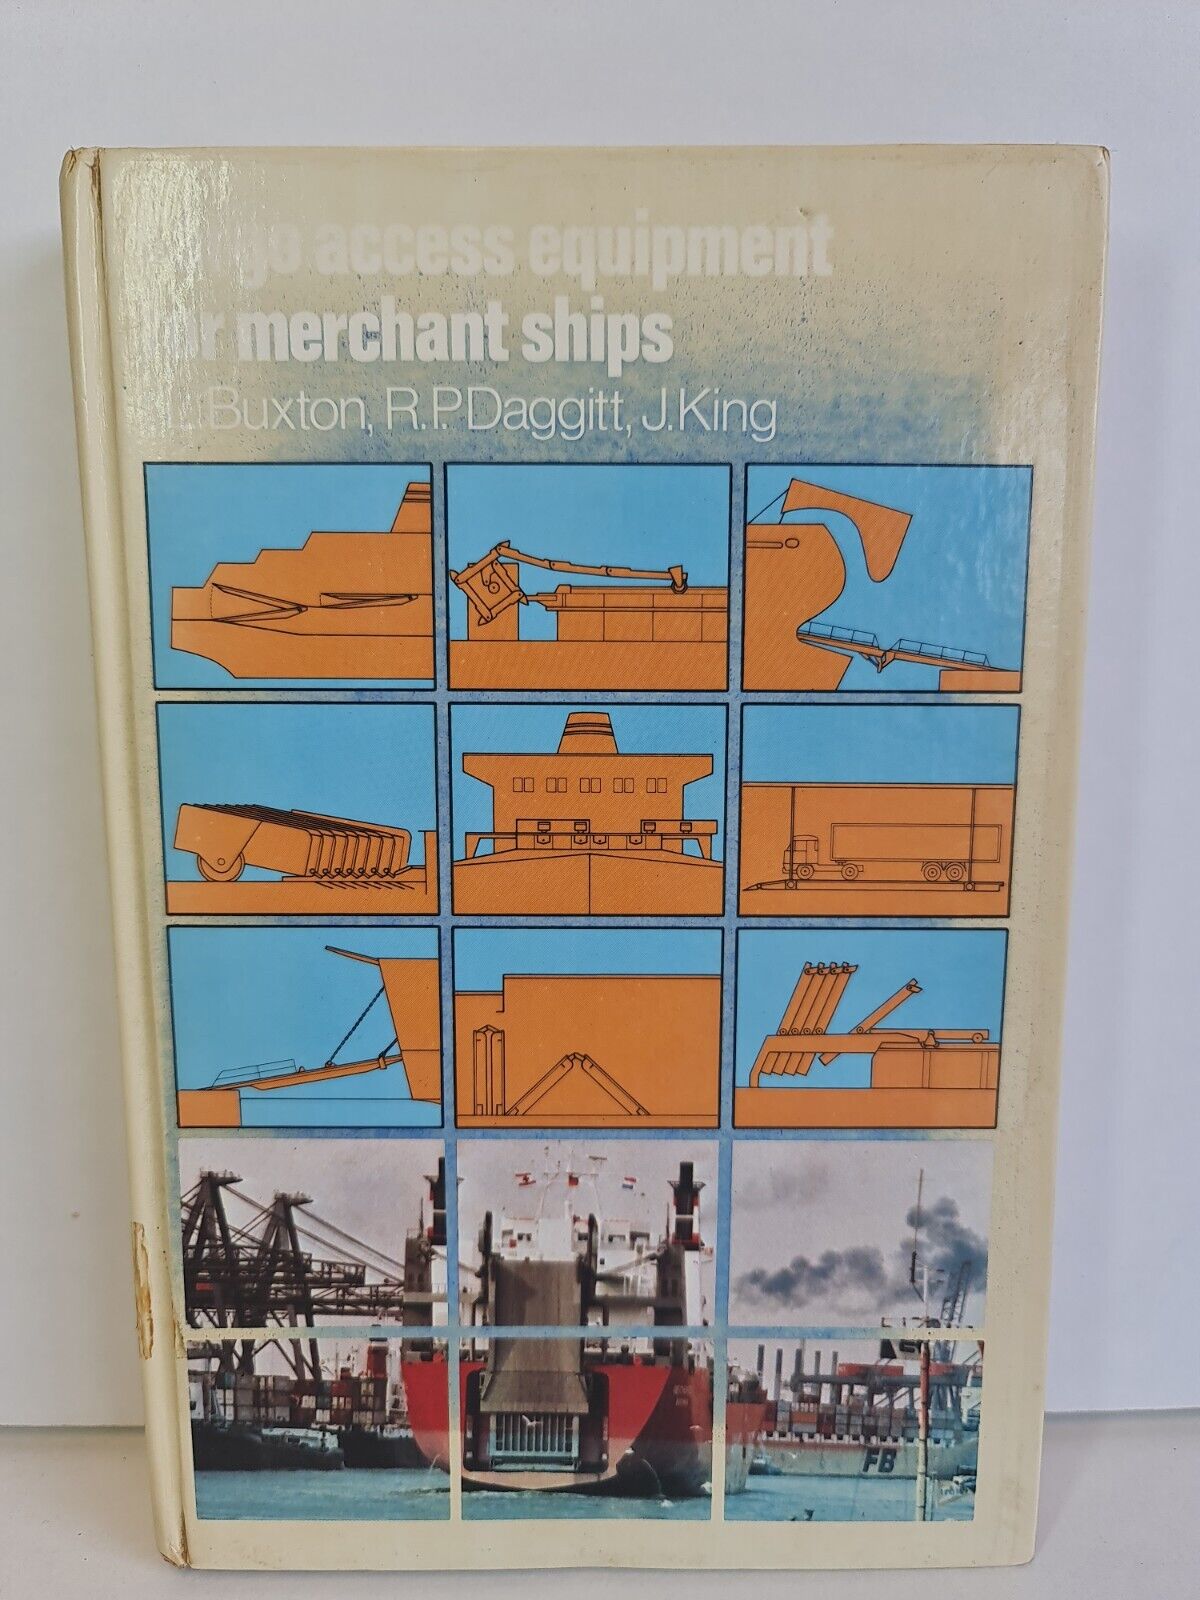 Cargo Access Equipment for Merchant Ships by Buxton (1978)